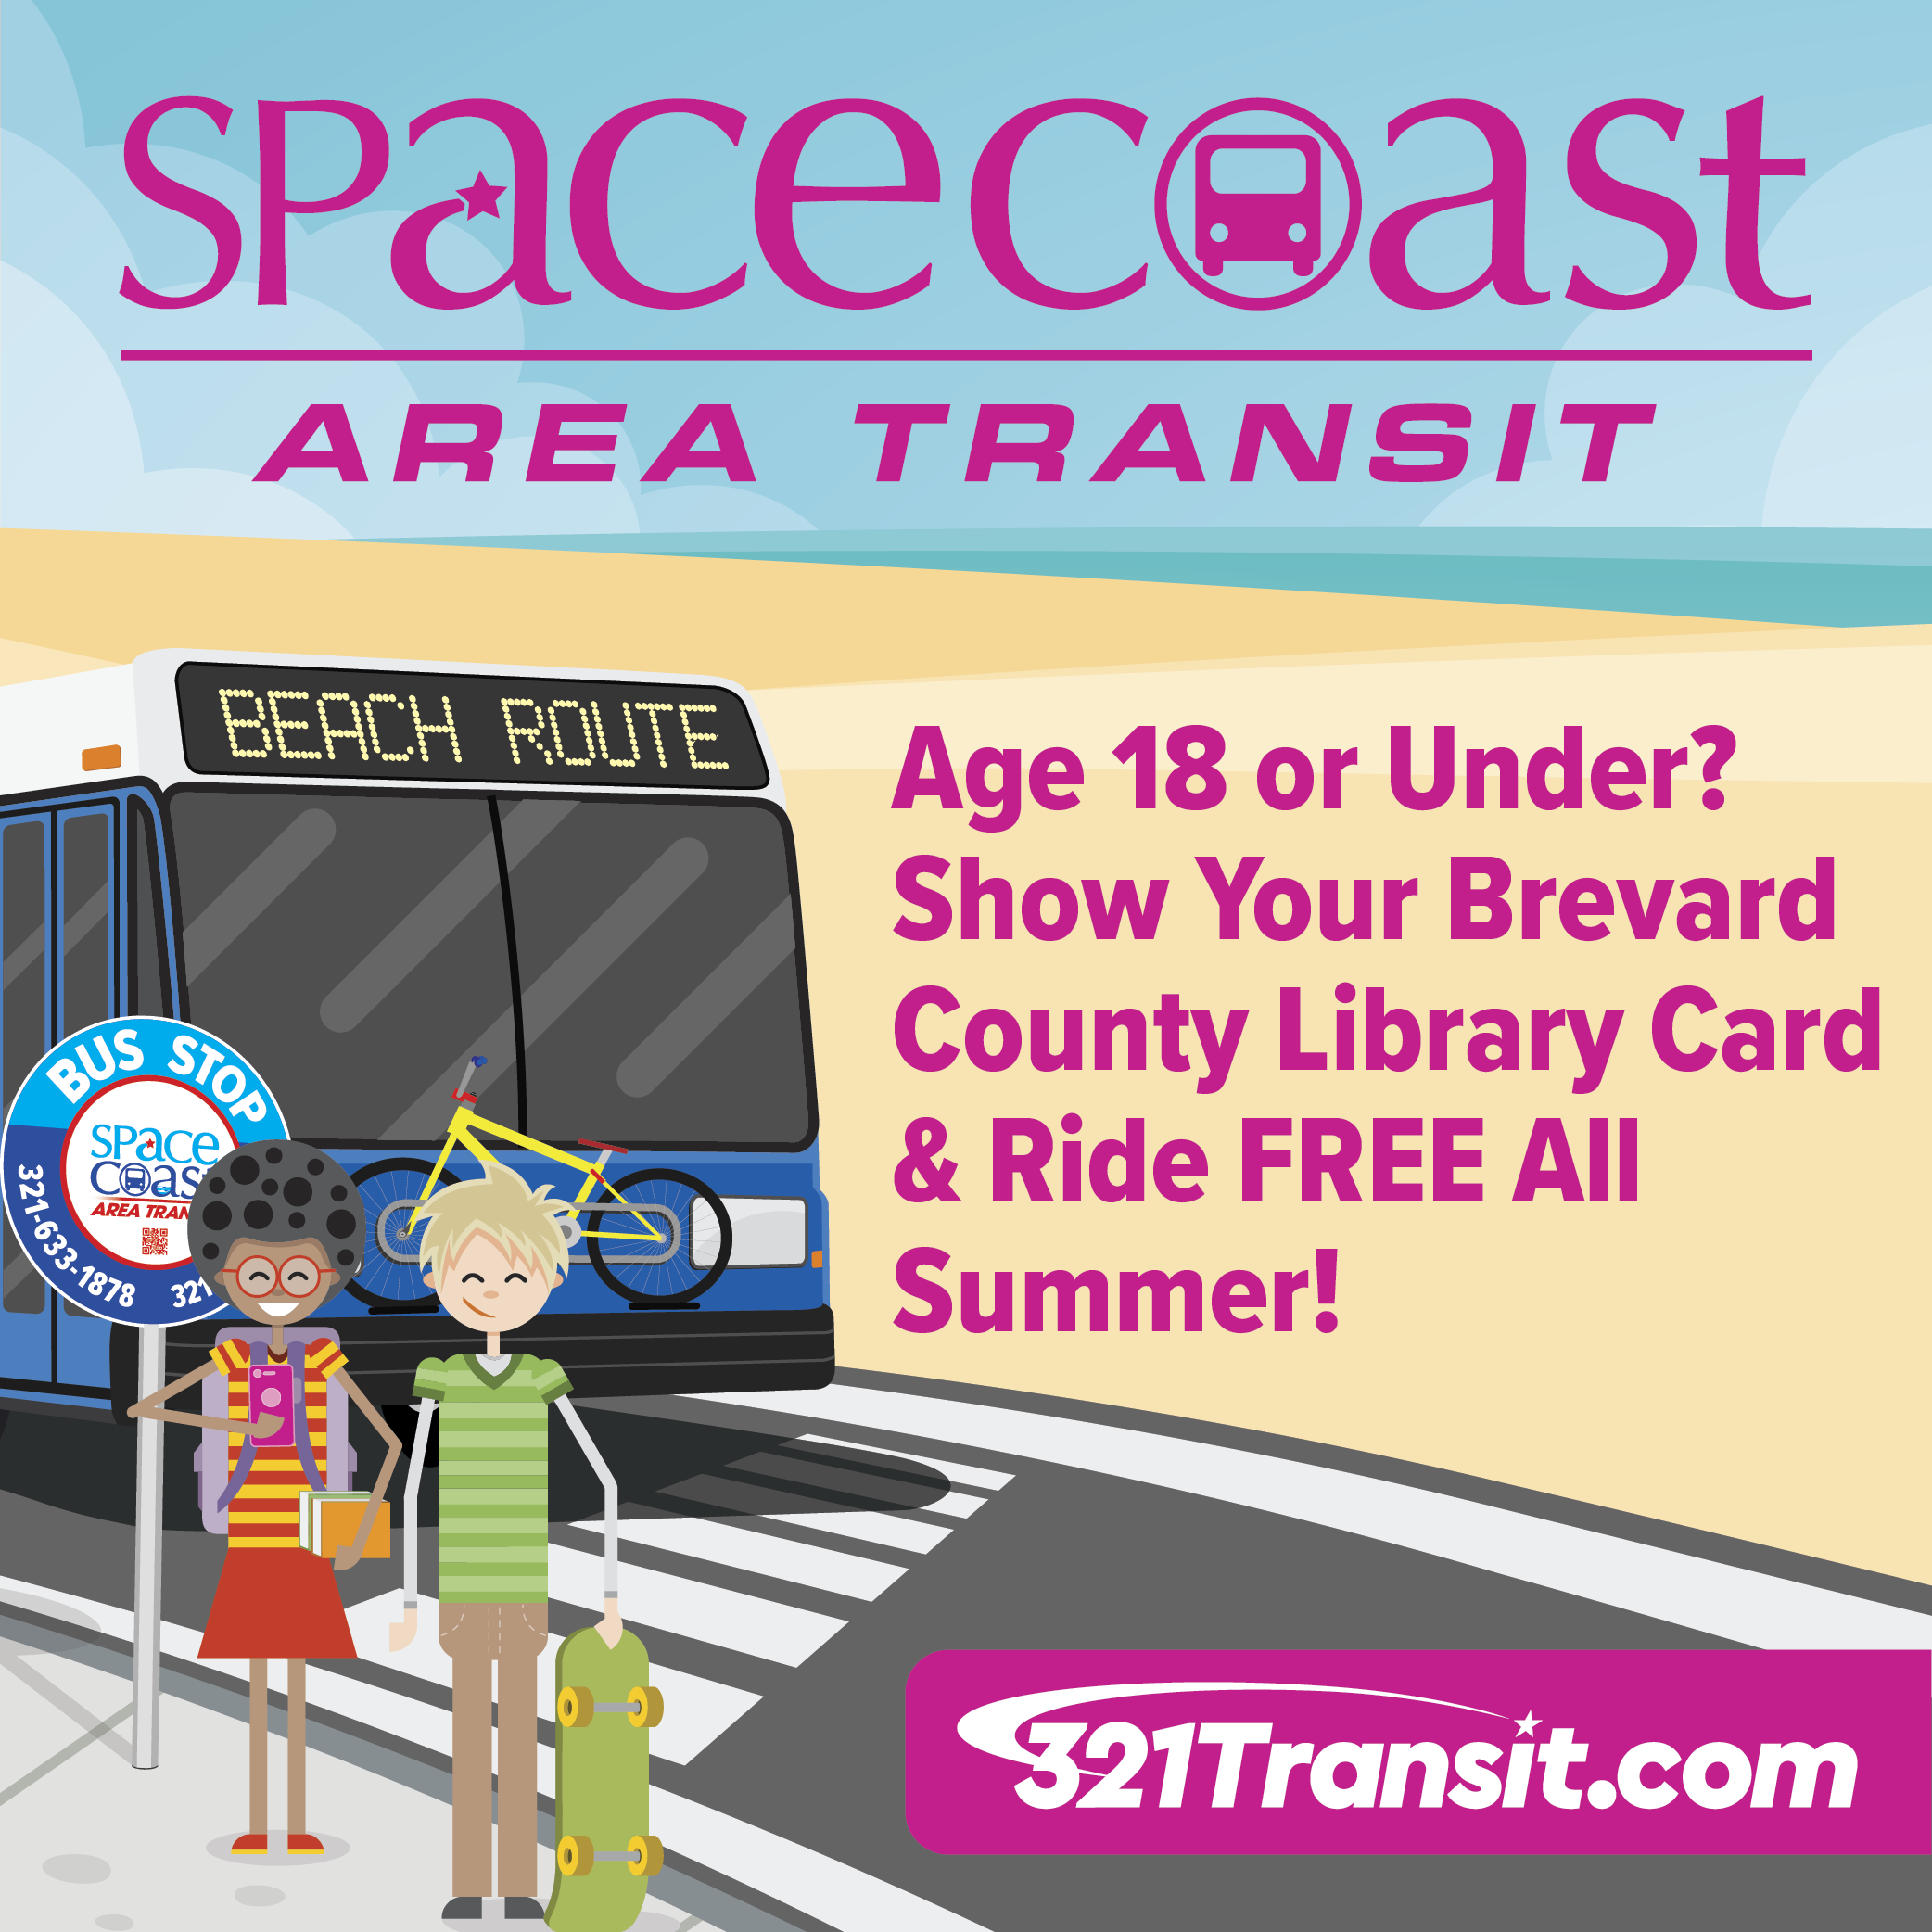 Space Coast Area Transit.  Age 18 or under?  Show your Brevard County Library Card & ride free all summer!  